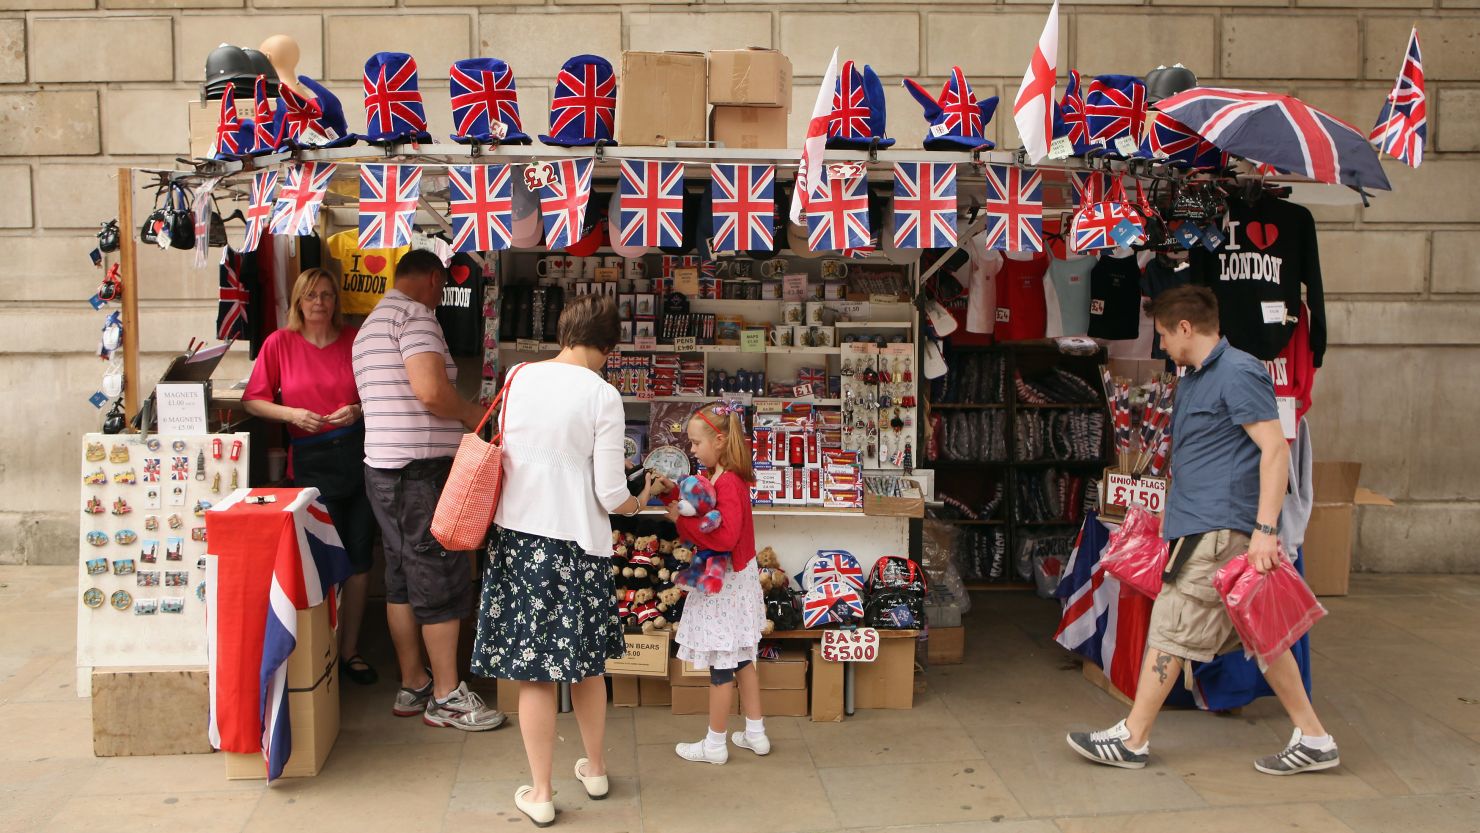 Britain is awash with Union Flags as the country prepares for the queen's jubilee.